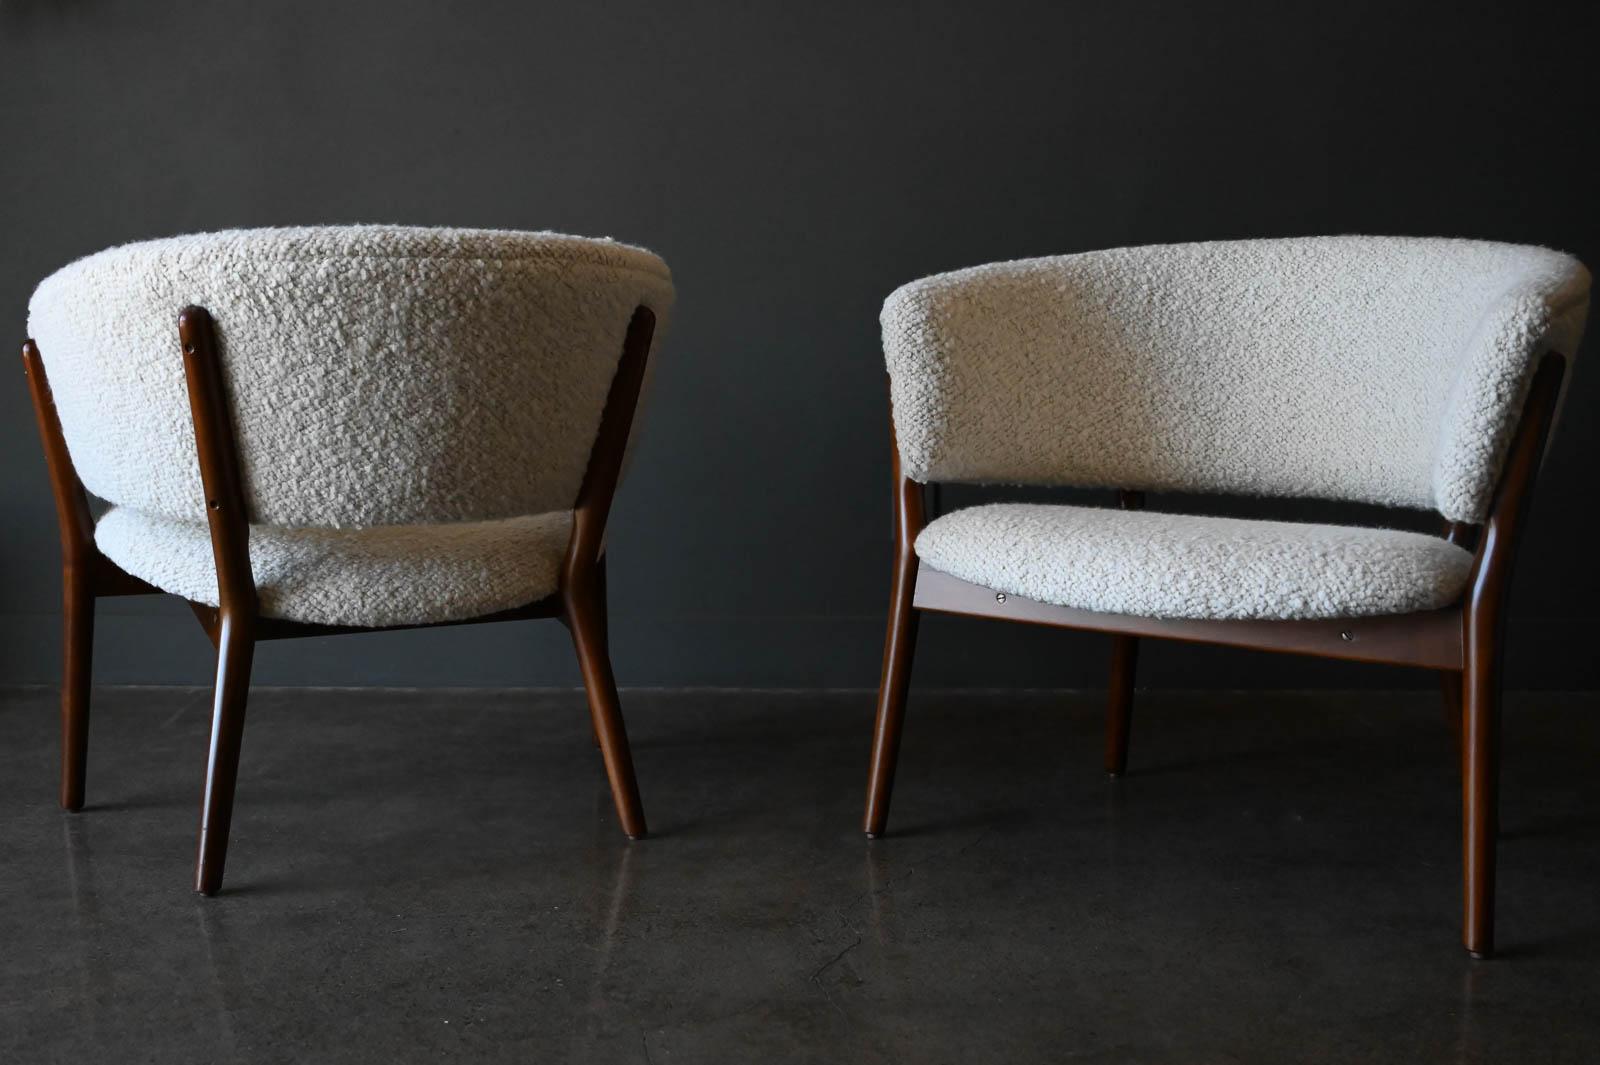 Pair of Nanna Ditzel Model 83 Lounge Chairs in Pierre Frey Wool Bouclé, 1952 In Excellent Condition For Sale In Costa Mesa, CA